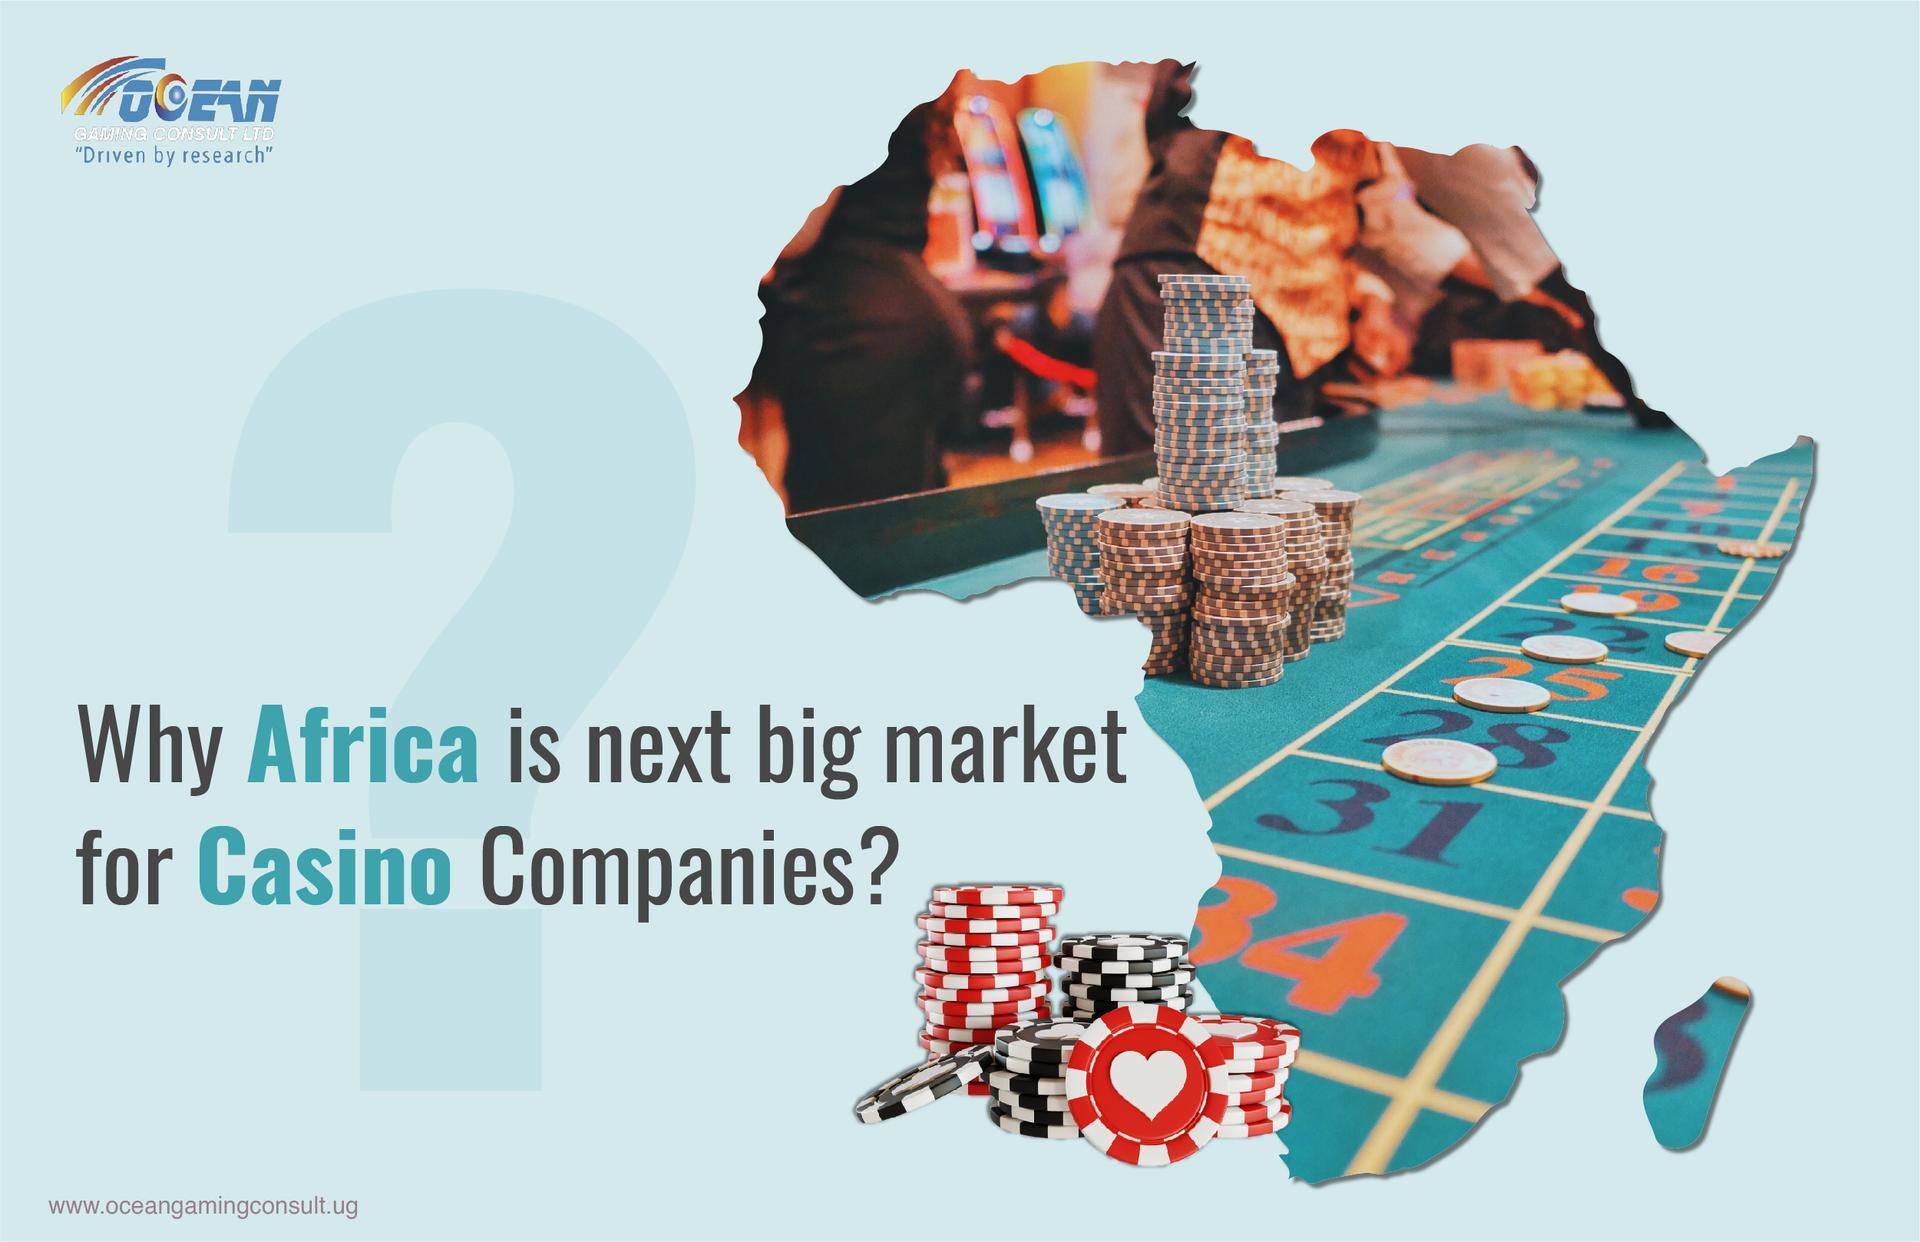 Why Africa is the next big market for Casino companies?